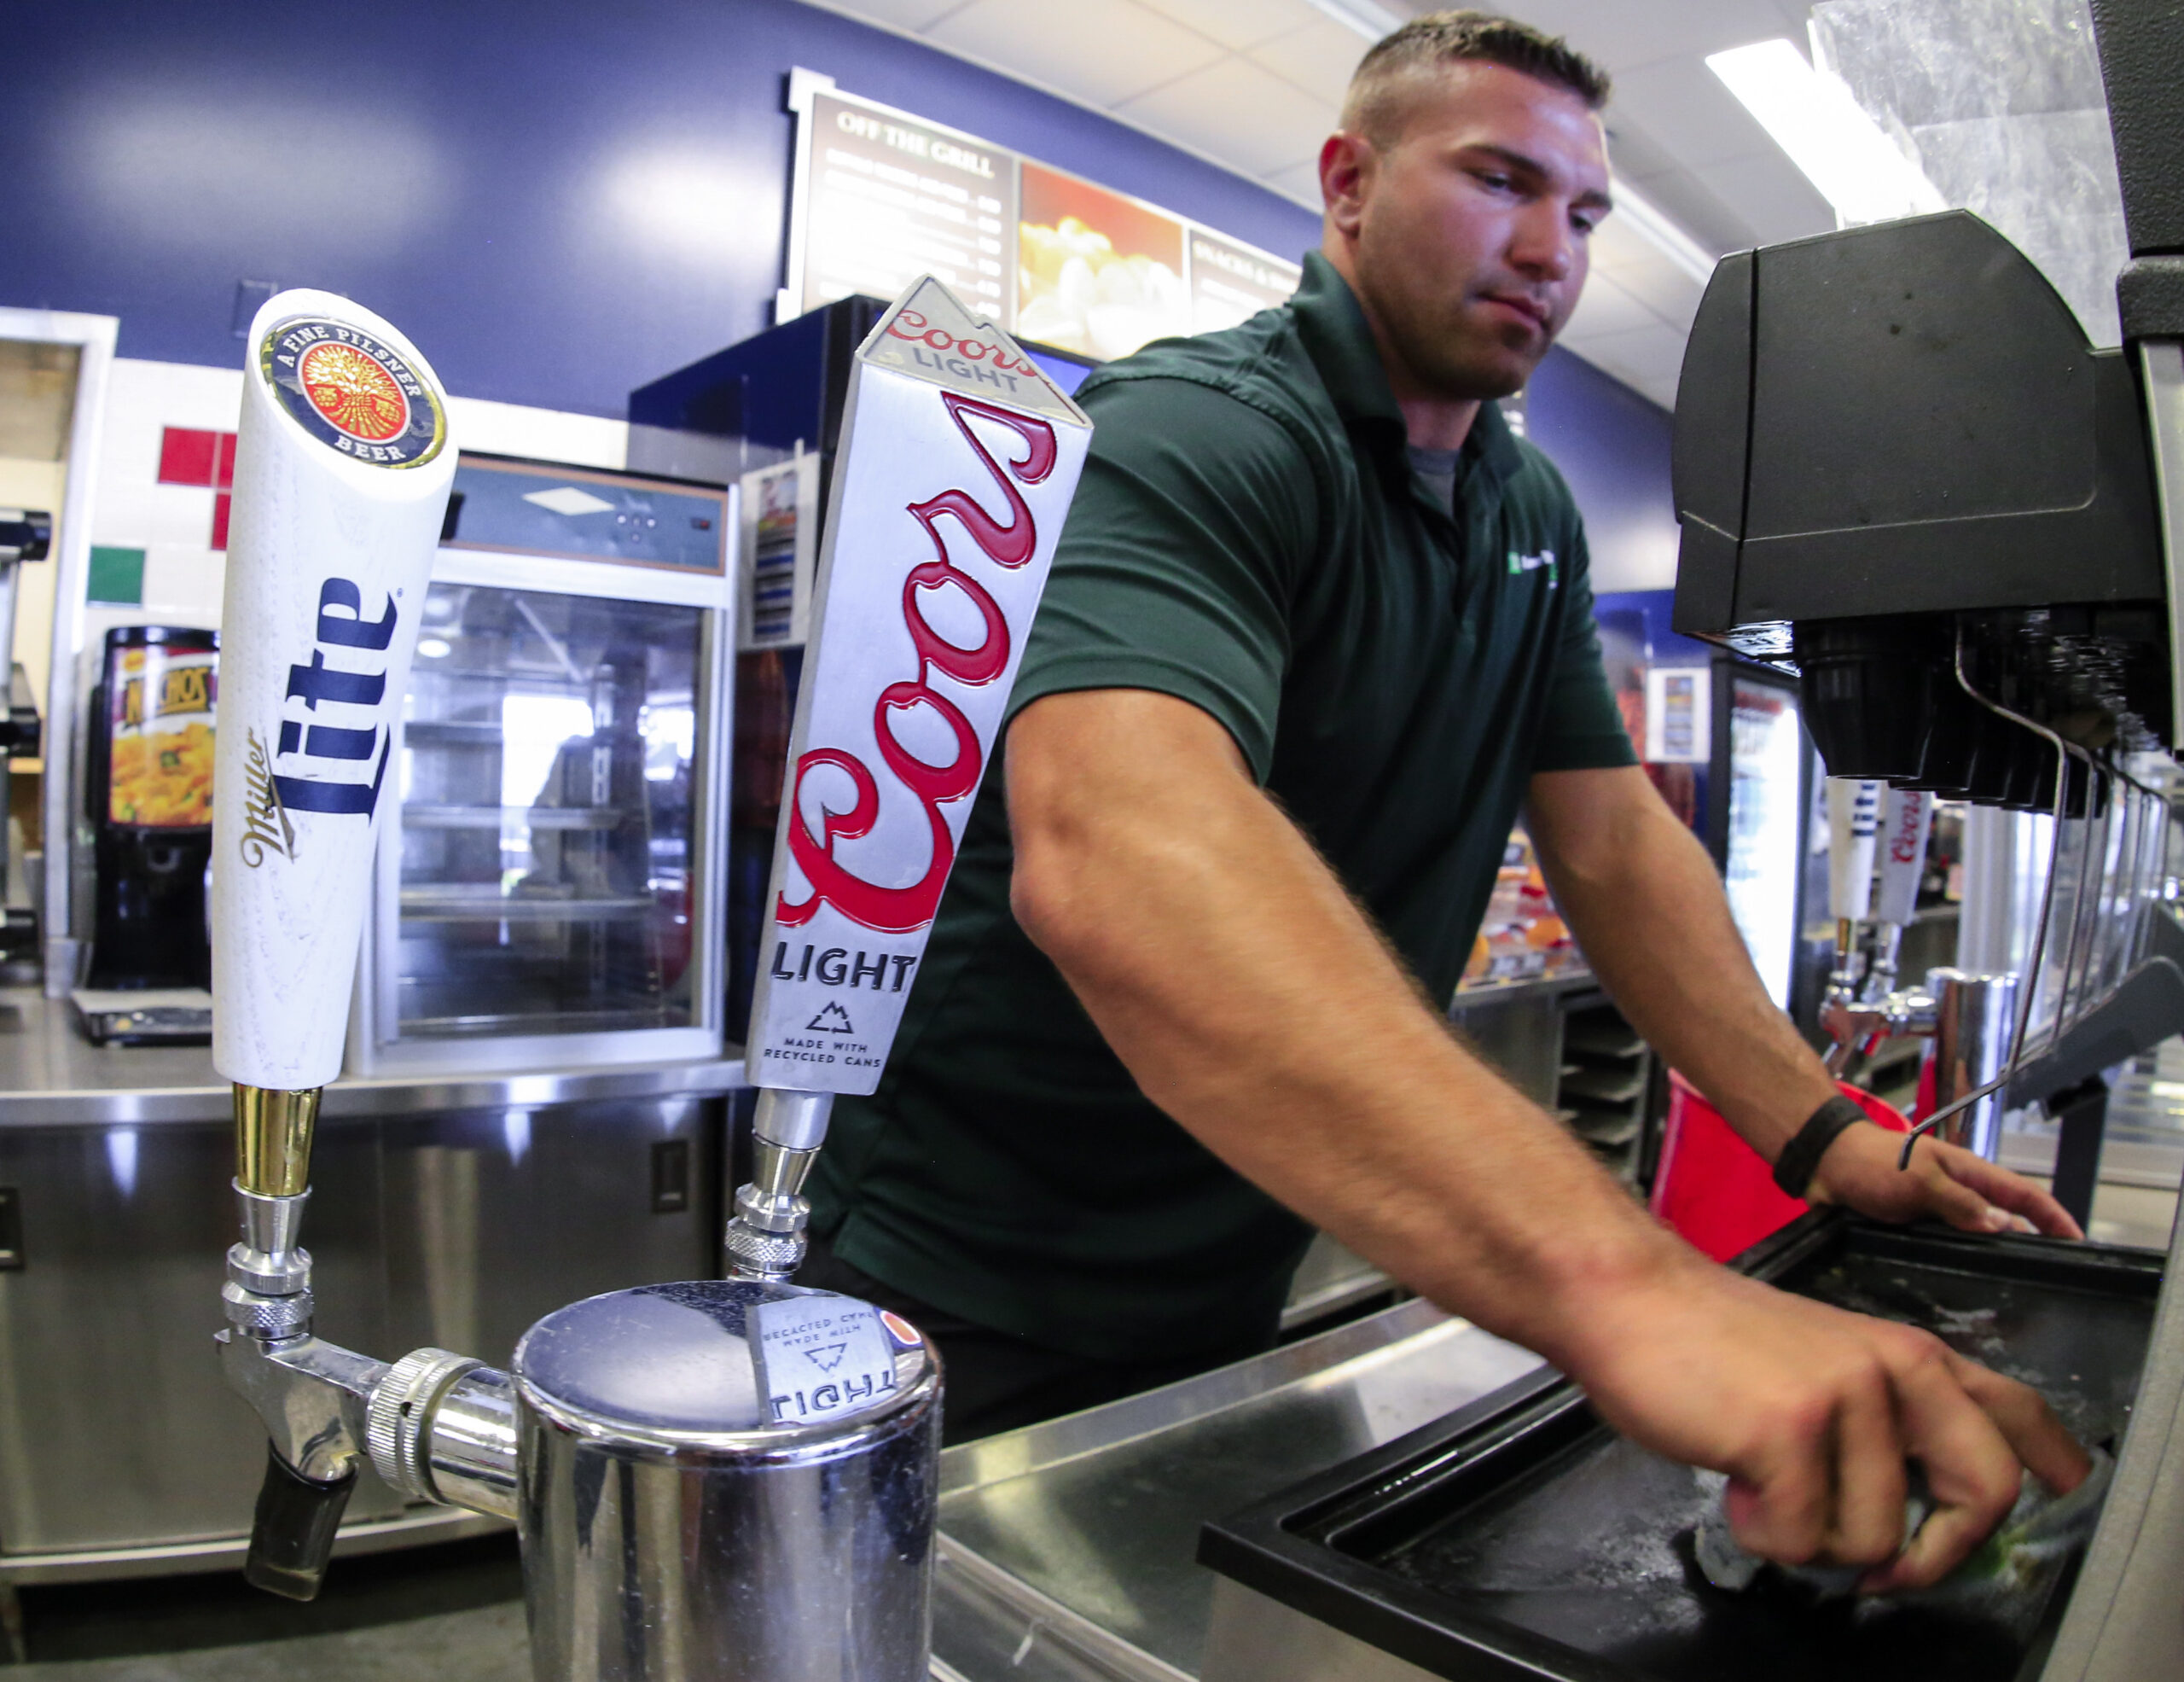 Trevor Hilger cleans a concession stand next to beer taps